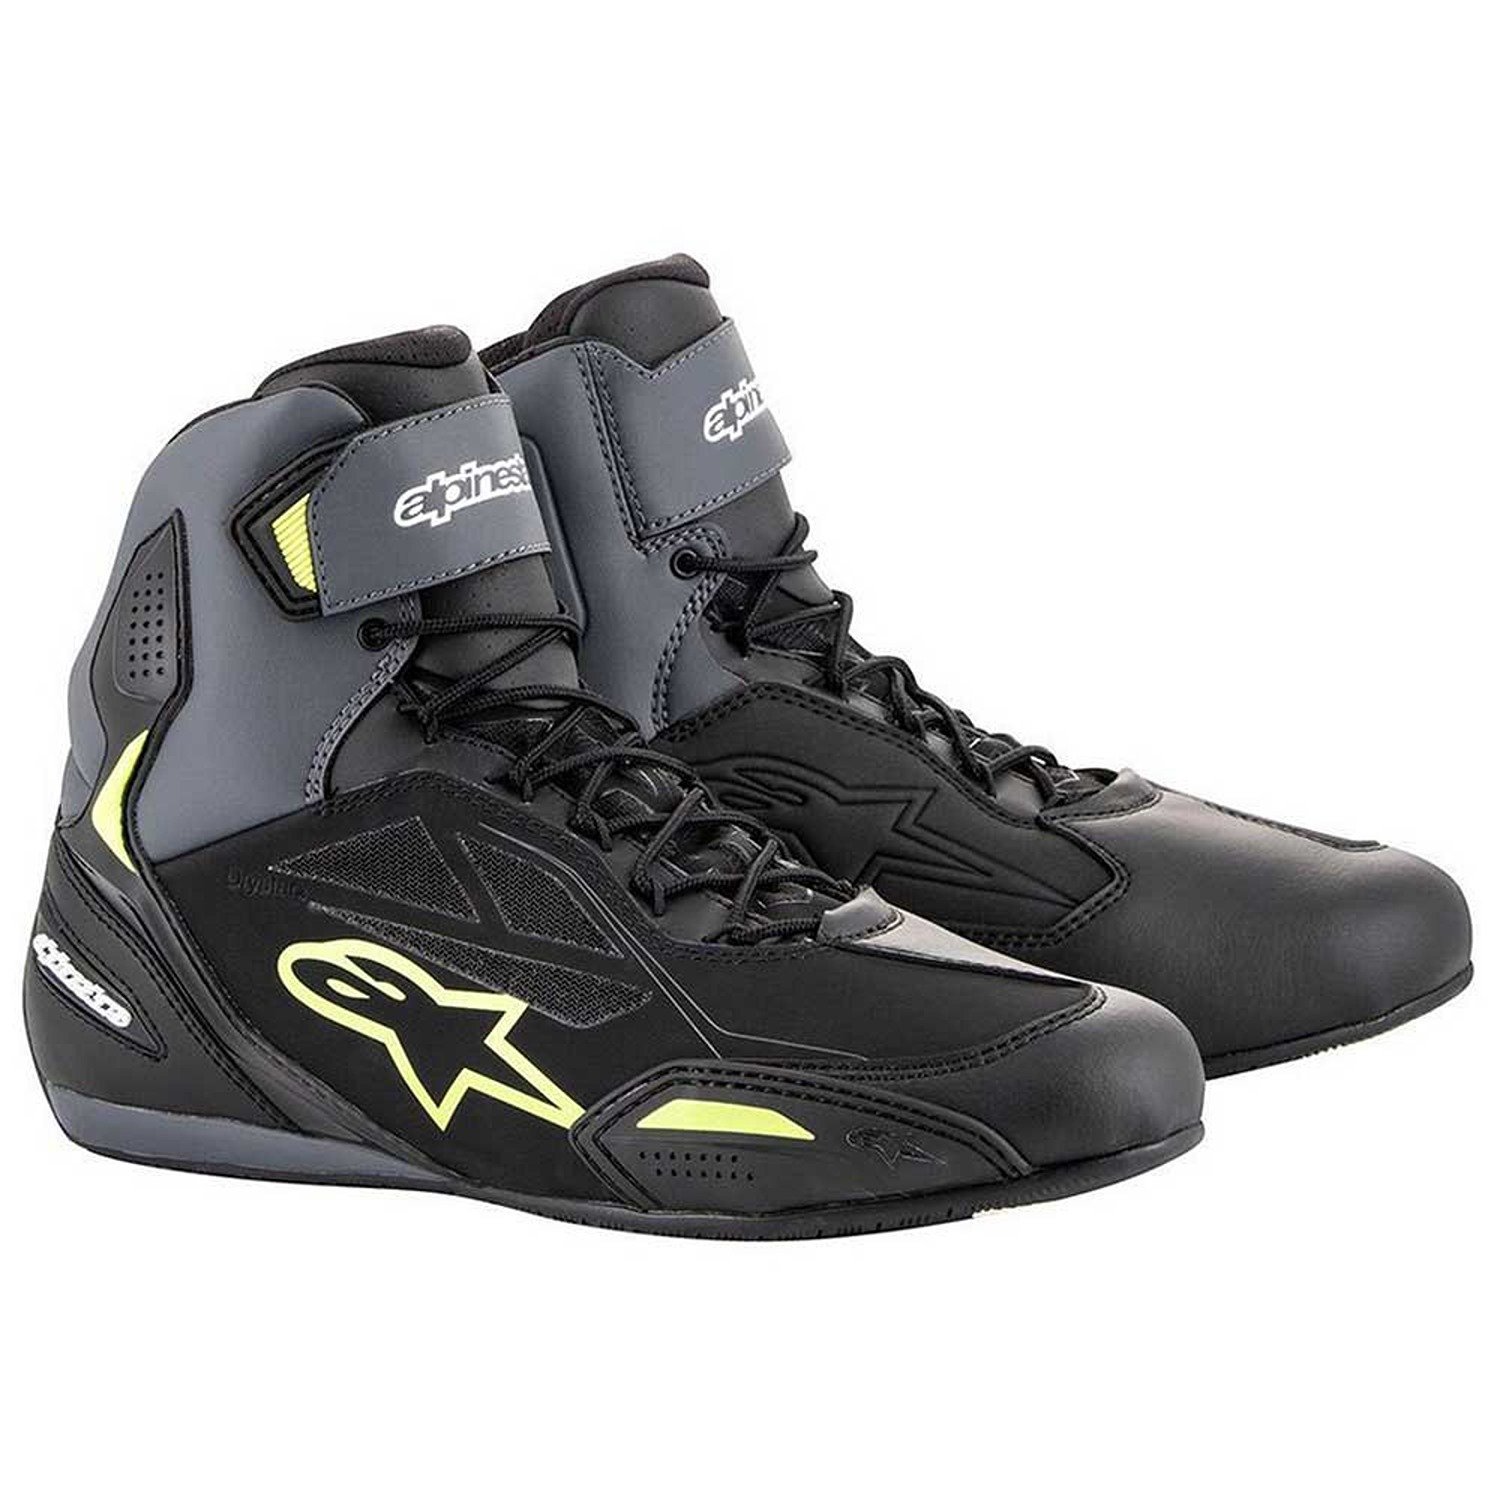 Image of Alpinestars Faster-3 Shoes Black Yellow Fluo Size US 6 ID 8059347331034